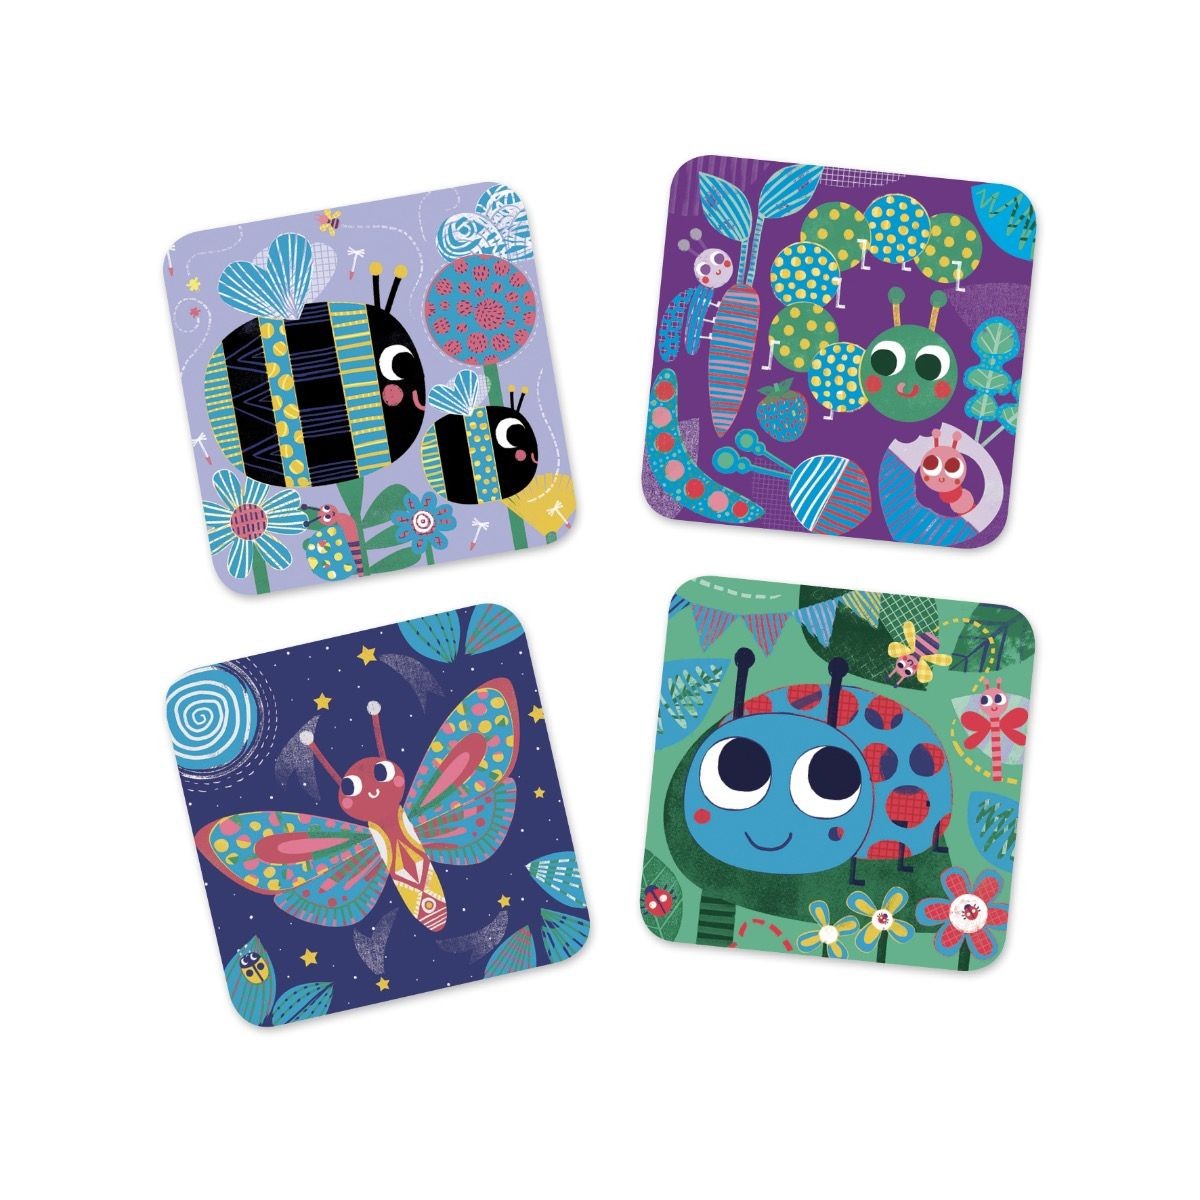 Bugs - Small Gifts For Little Ones - Scratch Cards